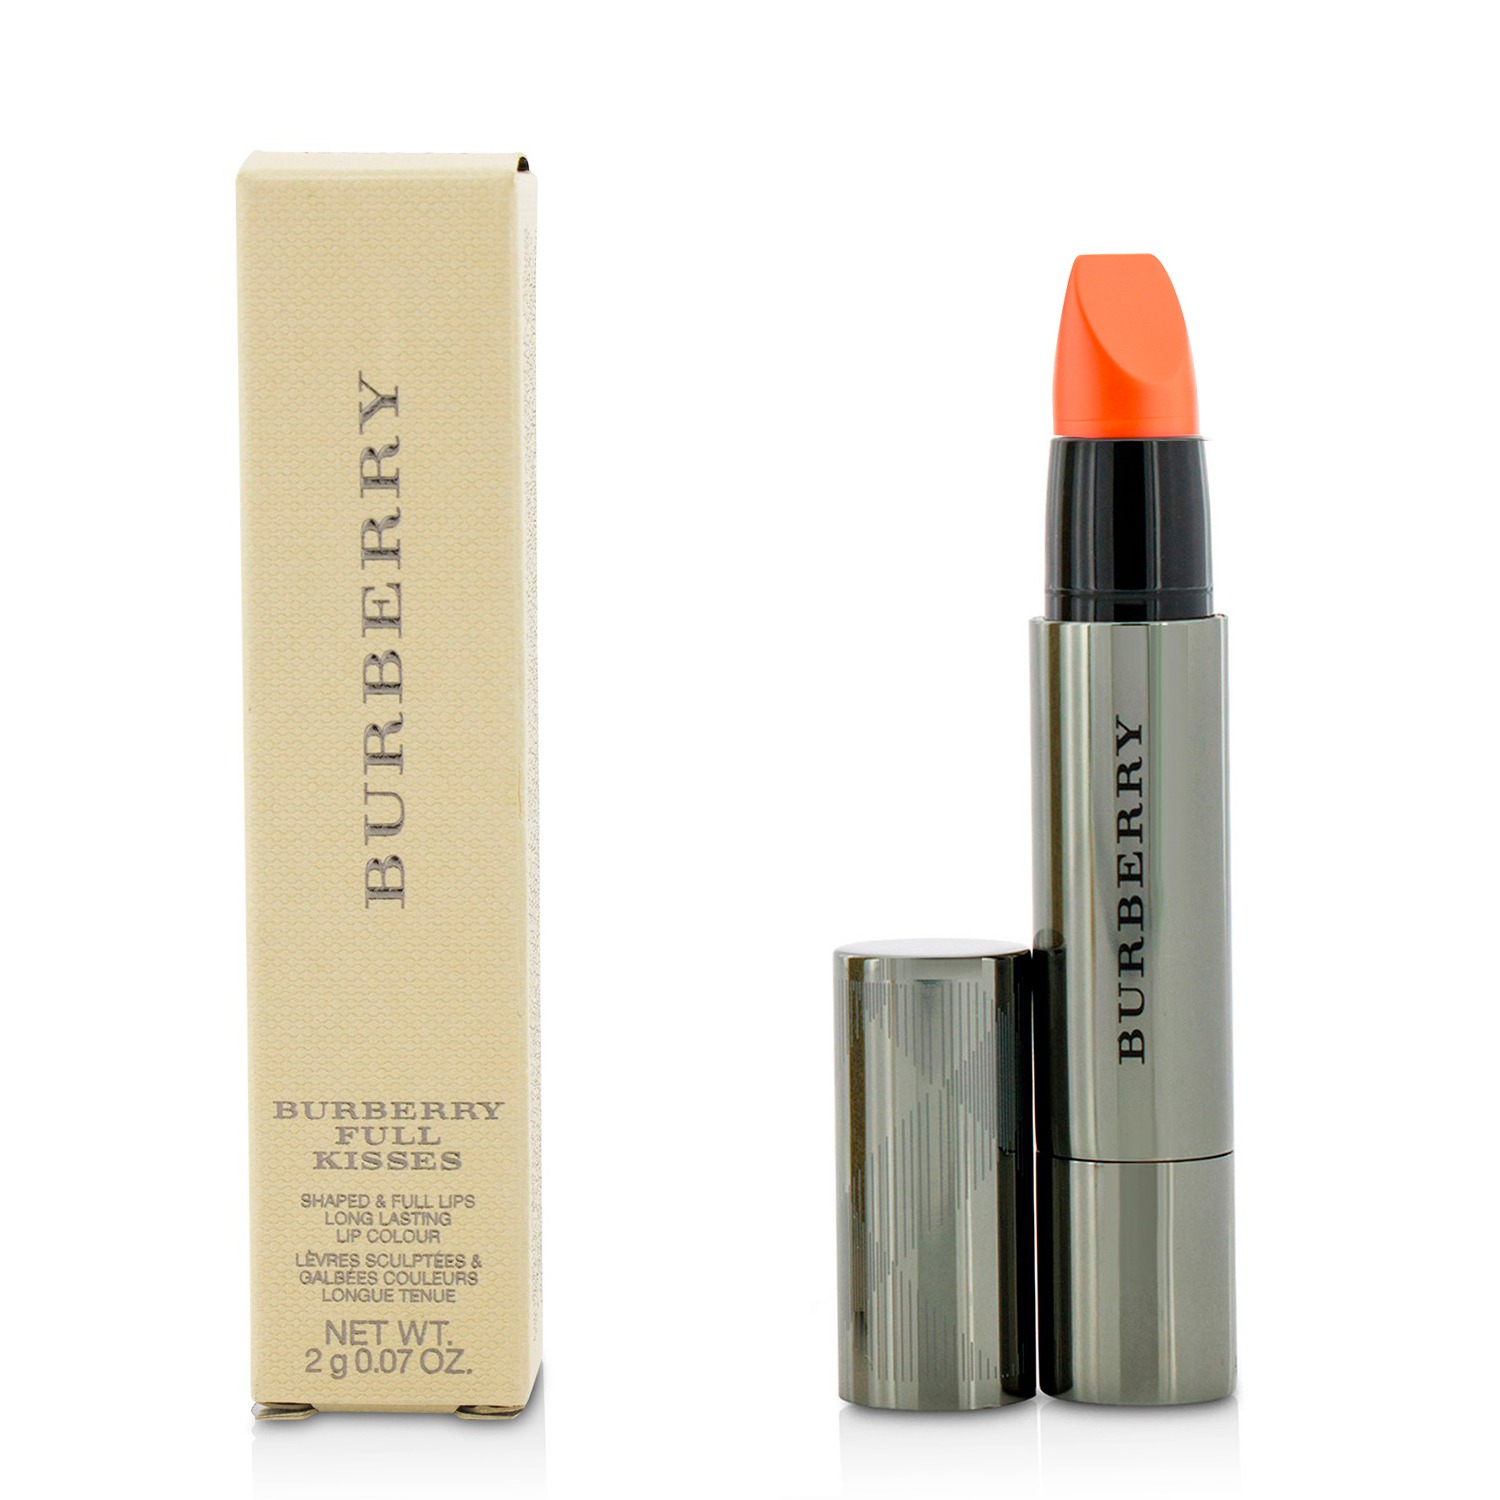 Burberry Full Kisses Shaped & Full Lips Long Lasting Lip Colour - # No. 525 Coral Red Burberry Image